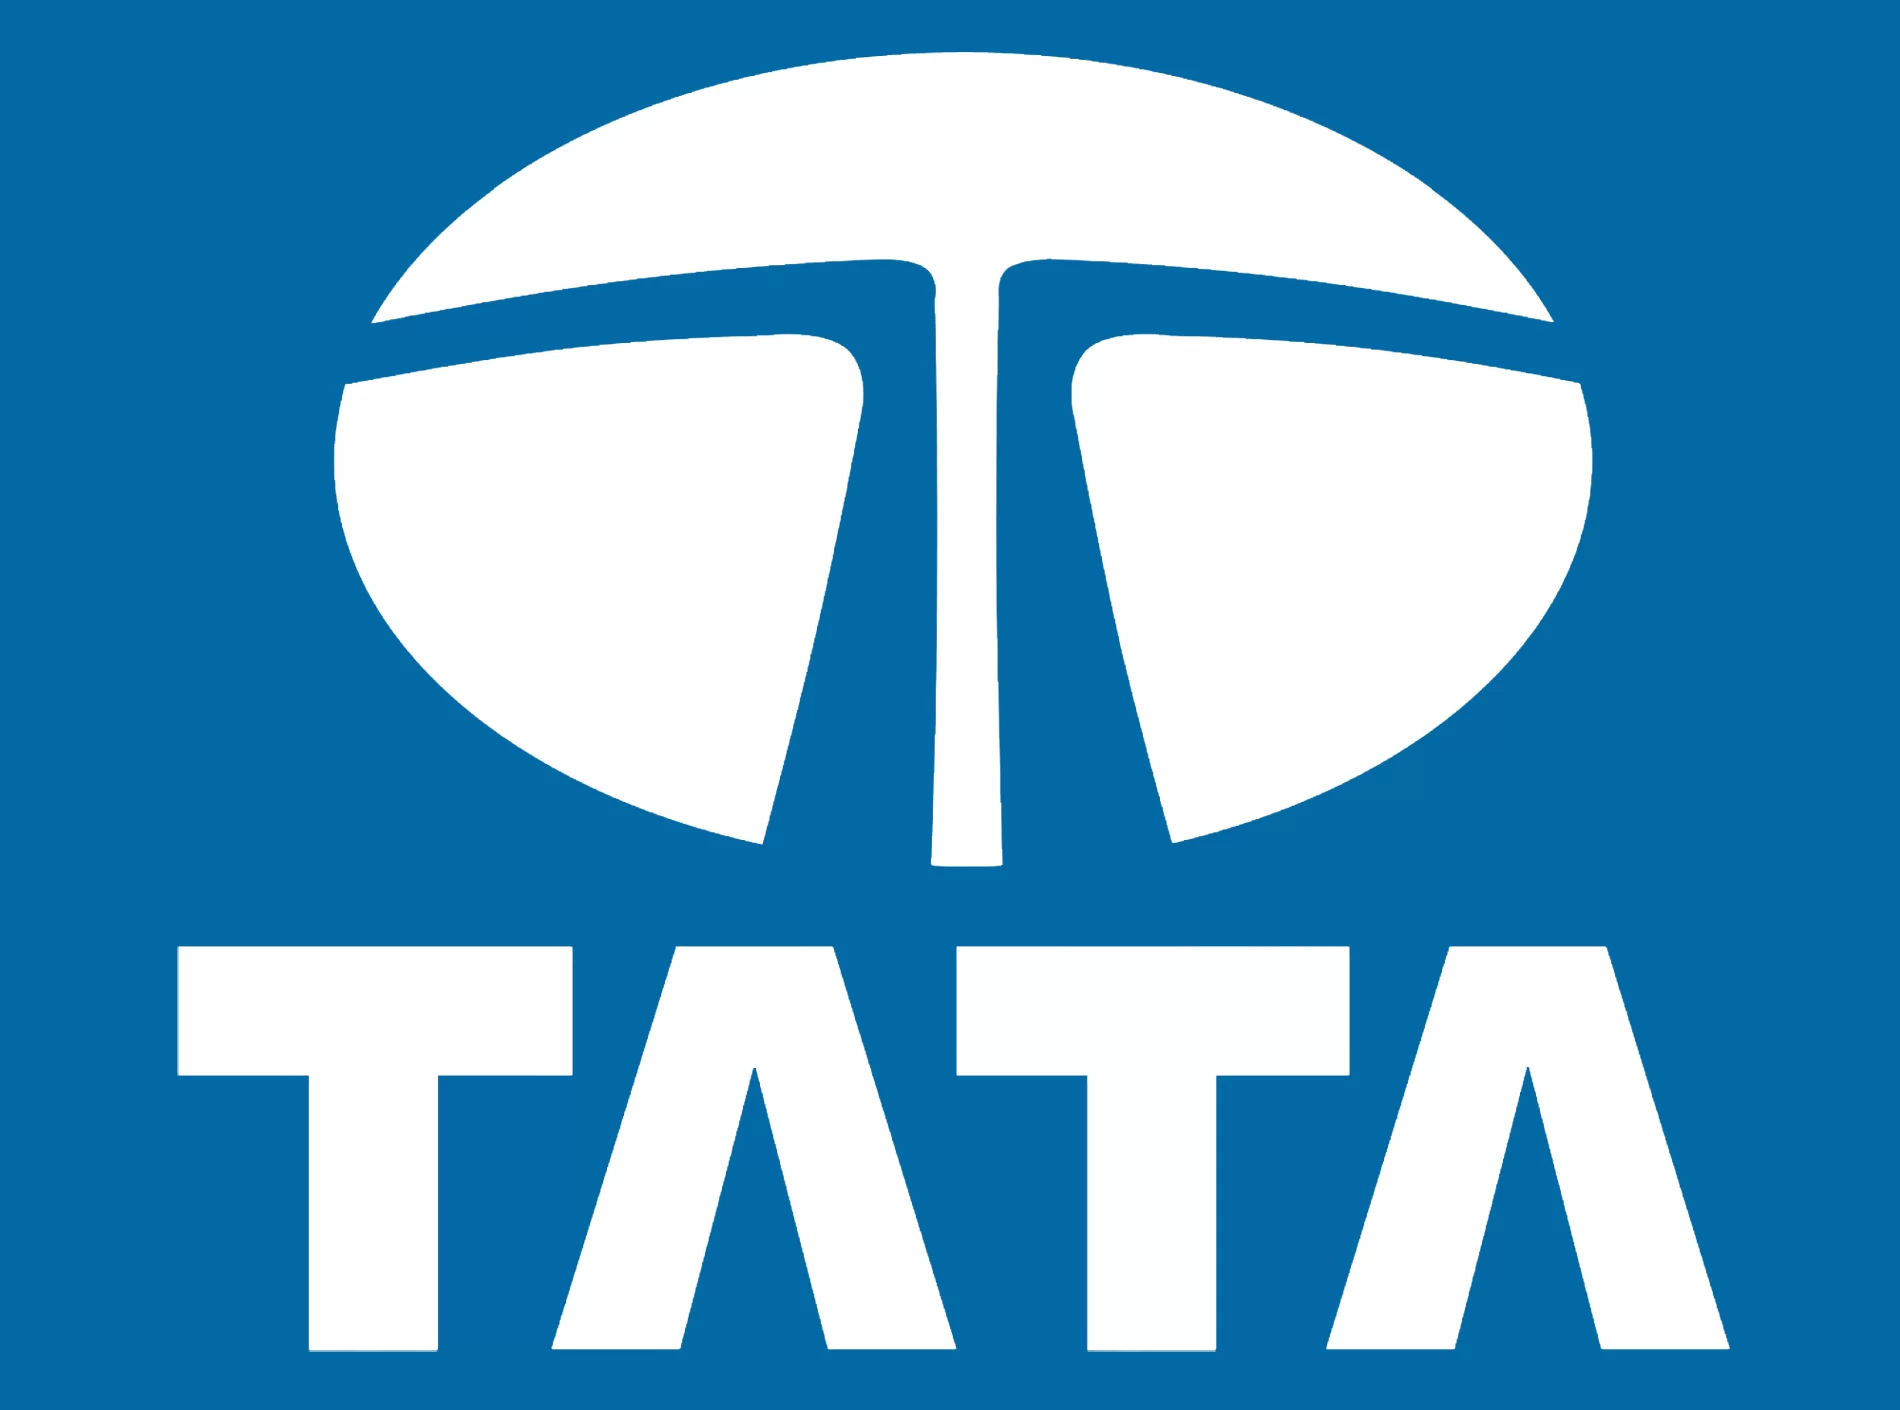 Tata Group Recognized as One of the World’s Top 50 Most Innovative Companies by Boston Consulting Group